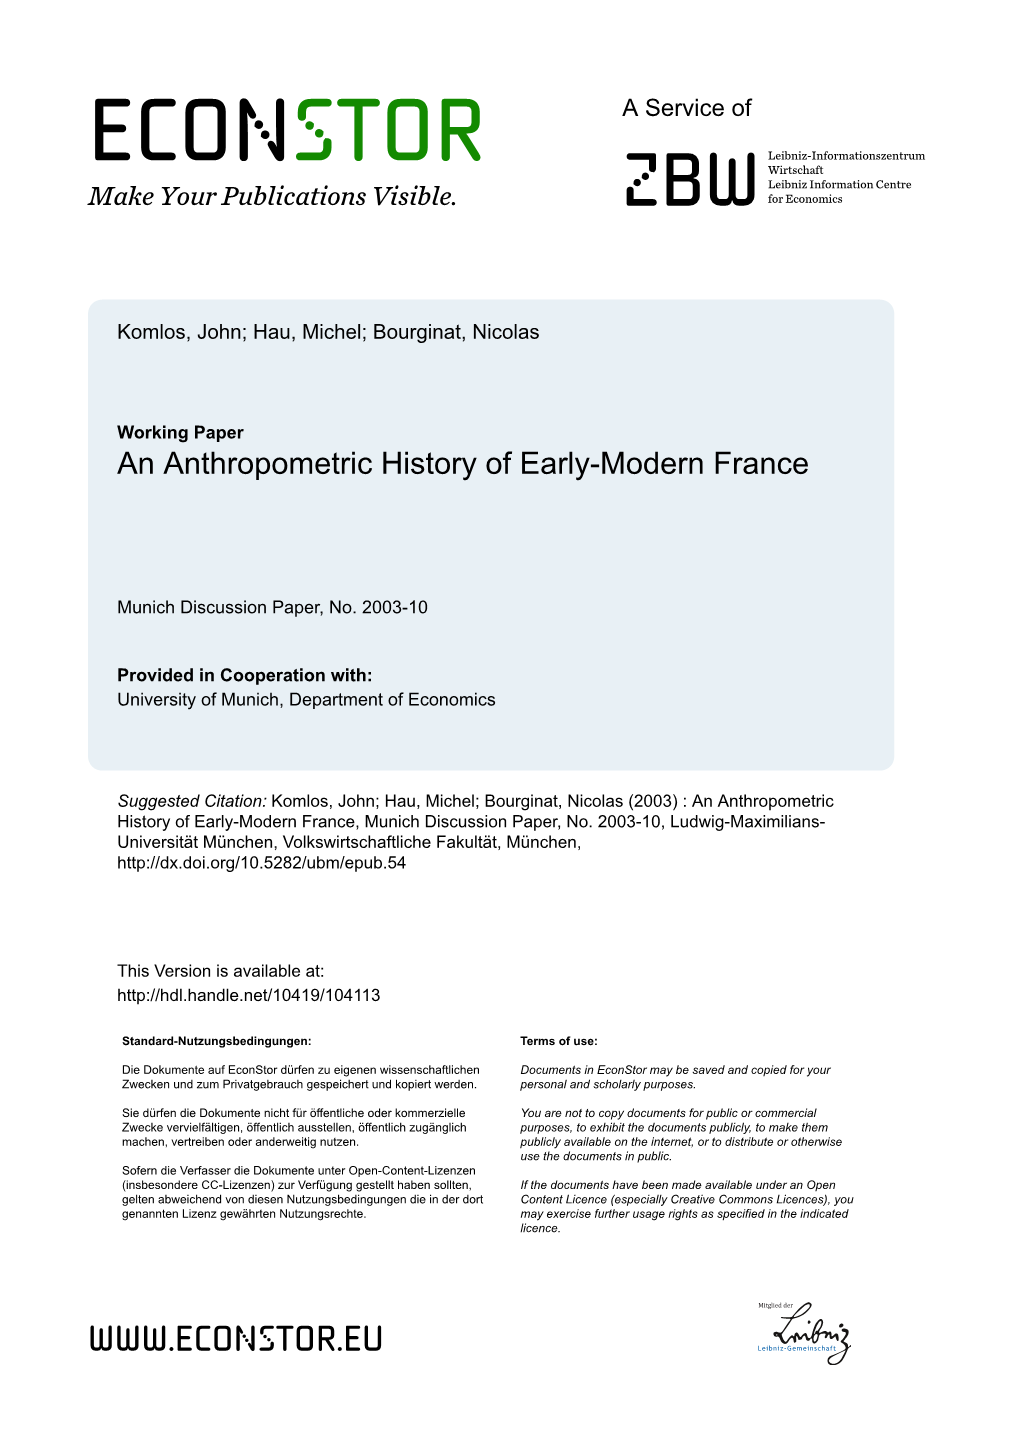 An Anthropometric History of Early-Modern France